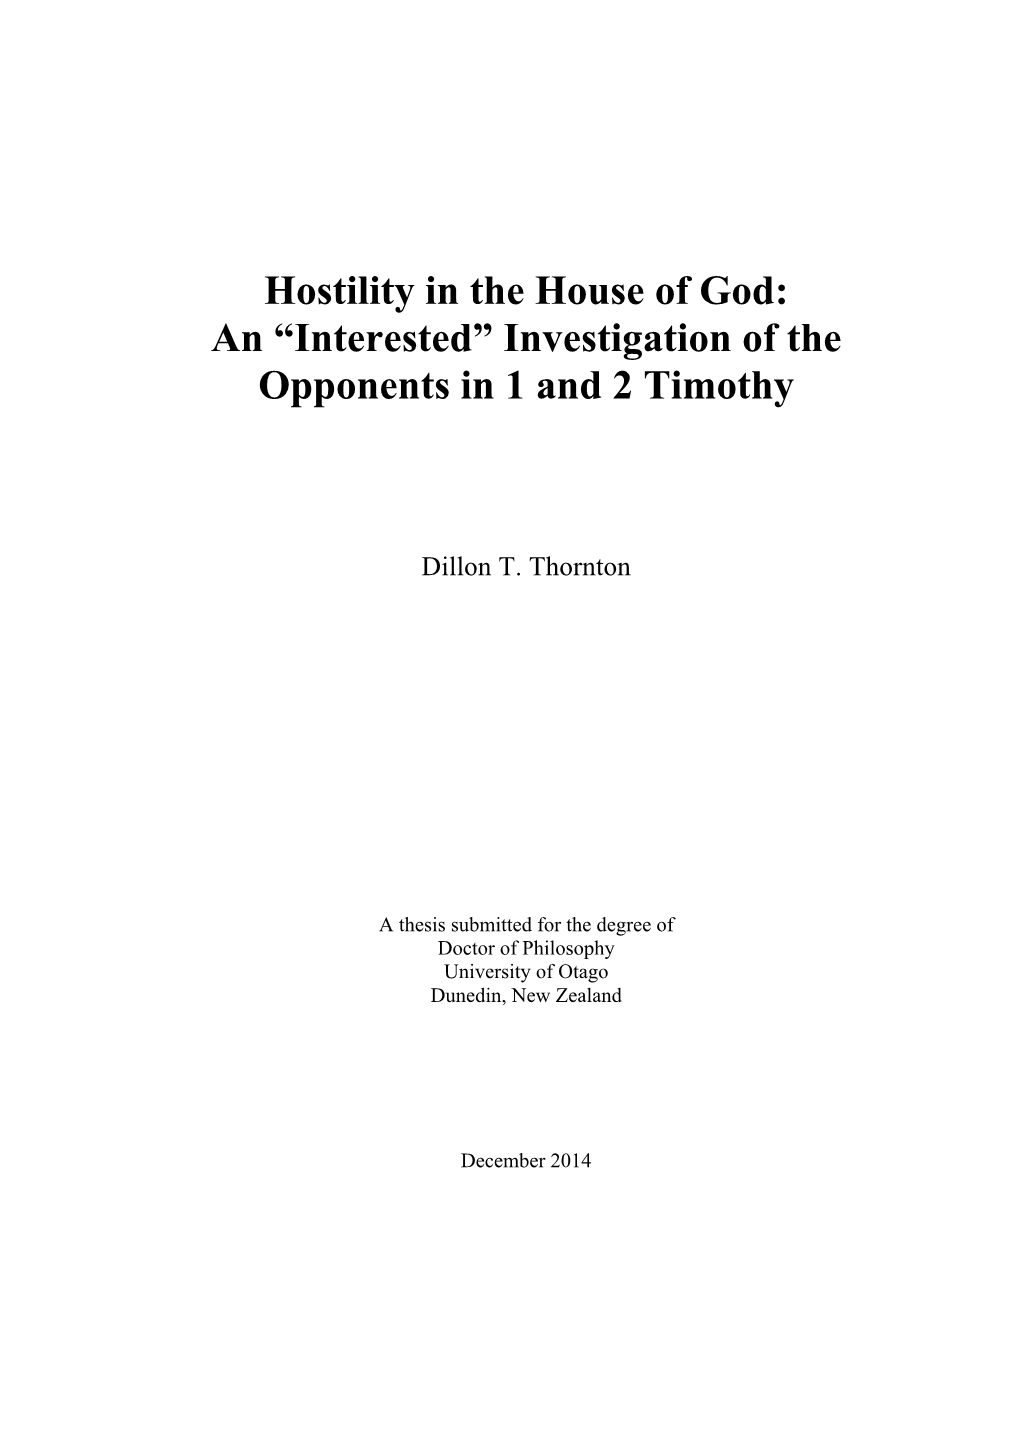 Hostility in the House of God: an “Interested” Investigation of the Opponents in 1 and 2 Timothy